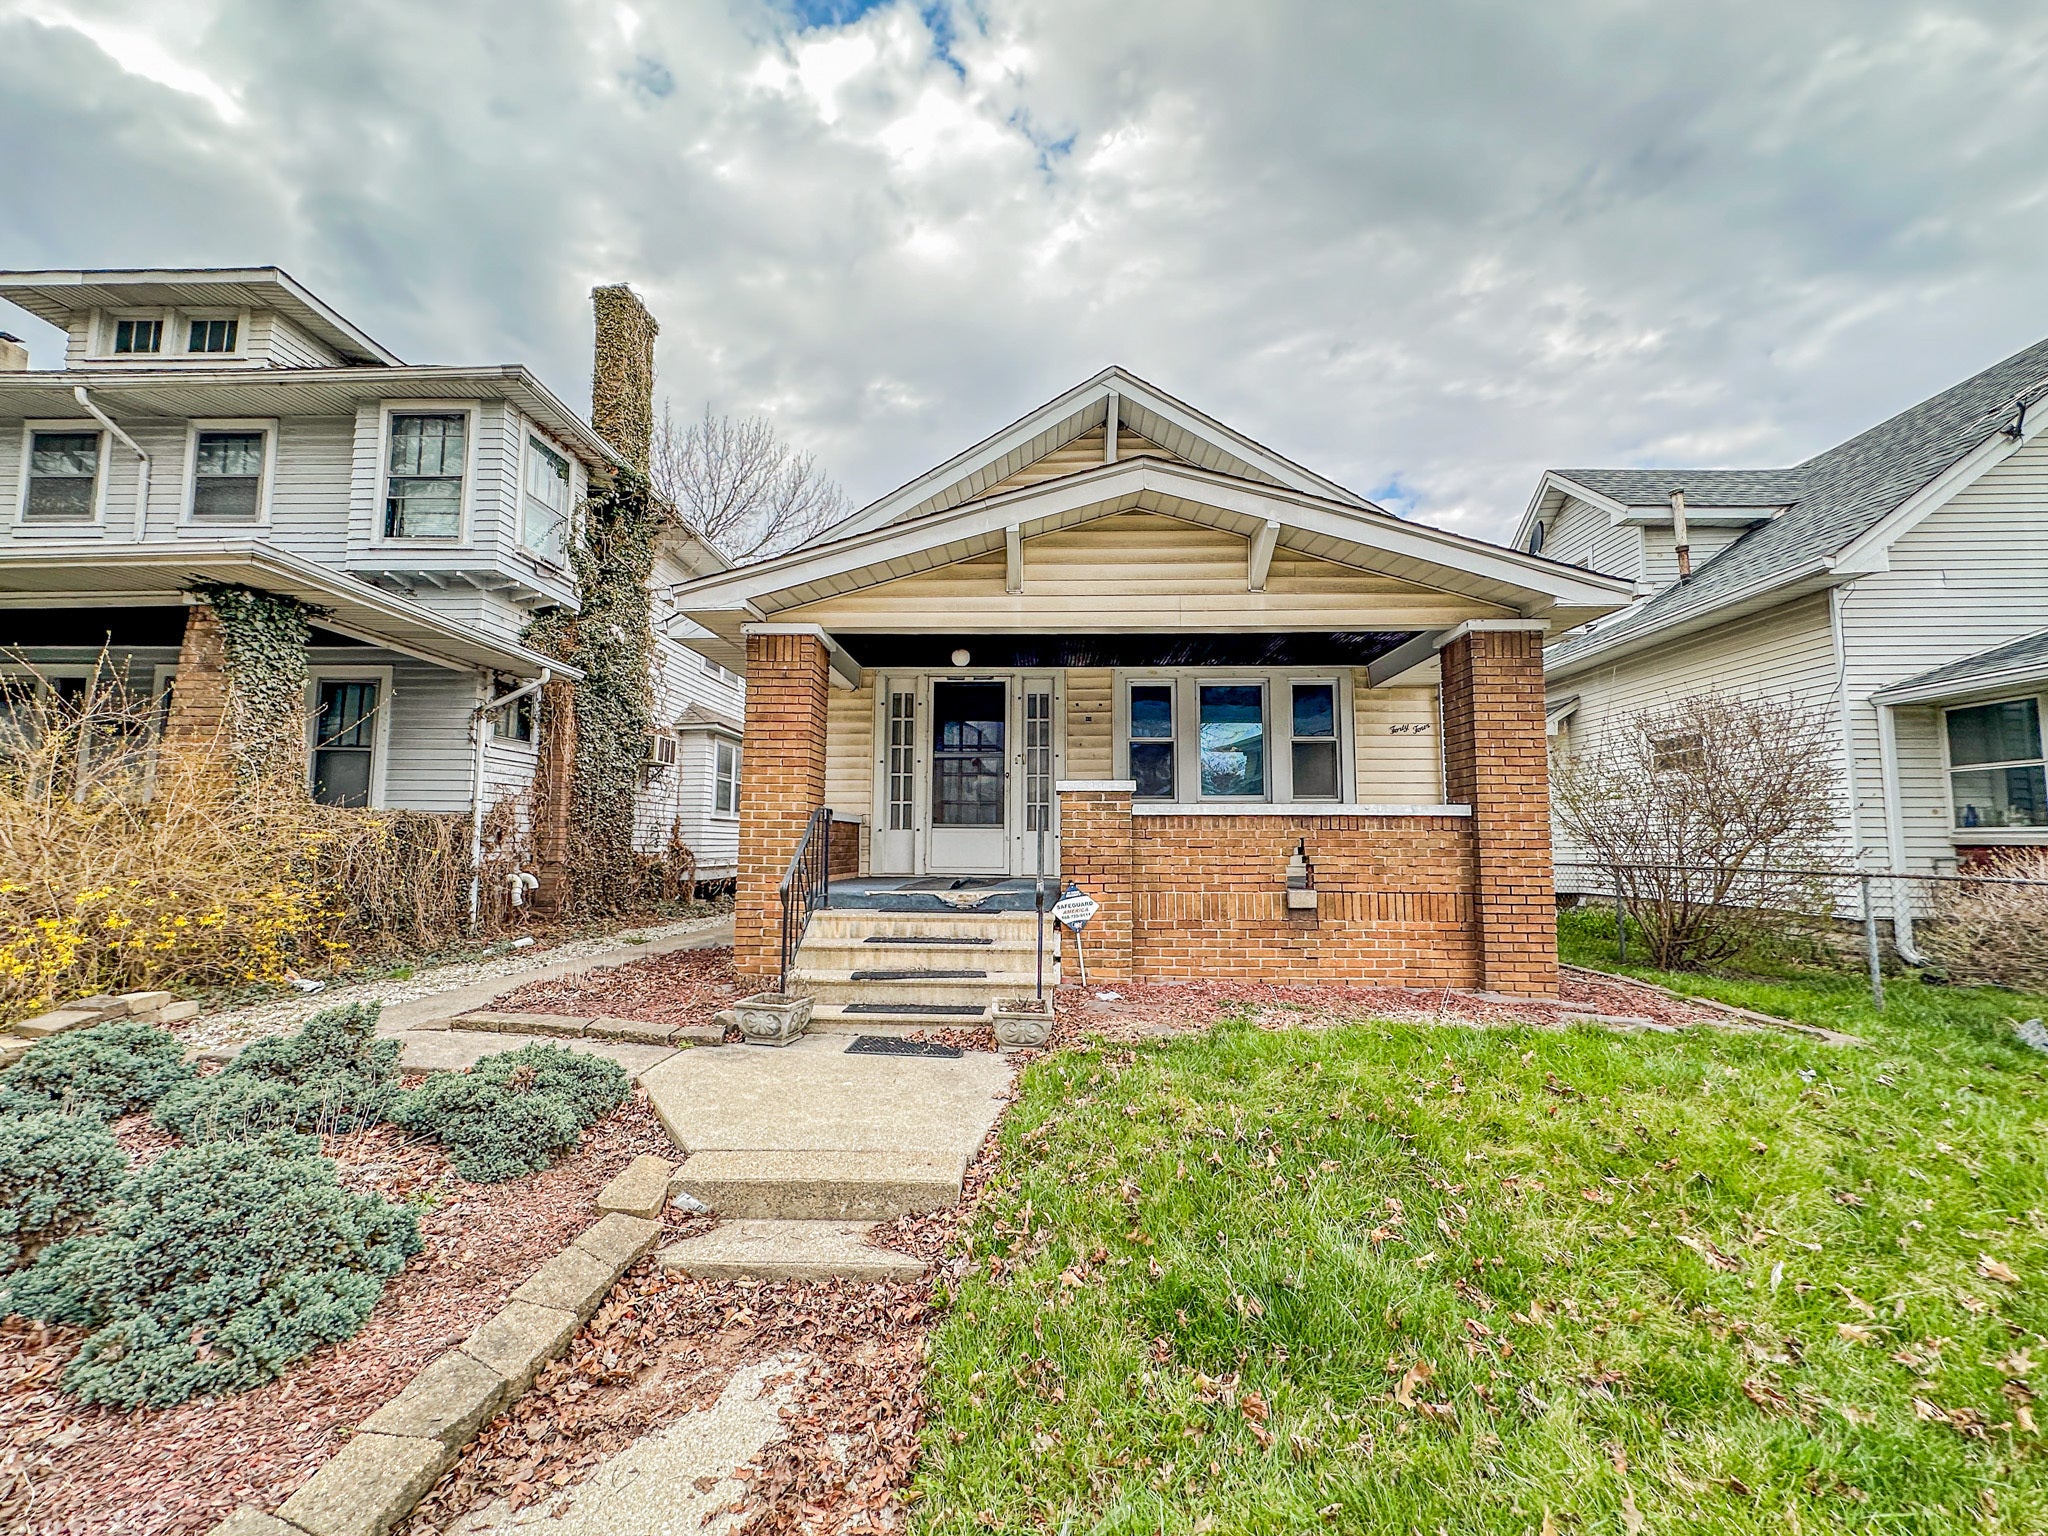 44 N Tremont Street, Indianapolis